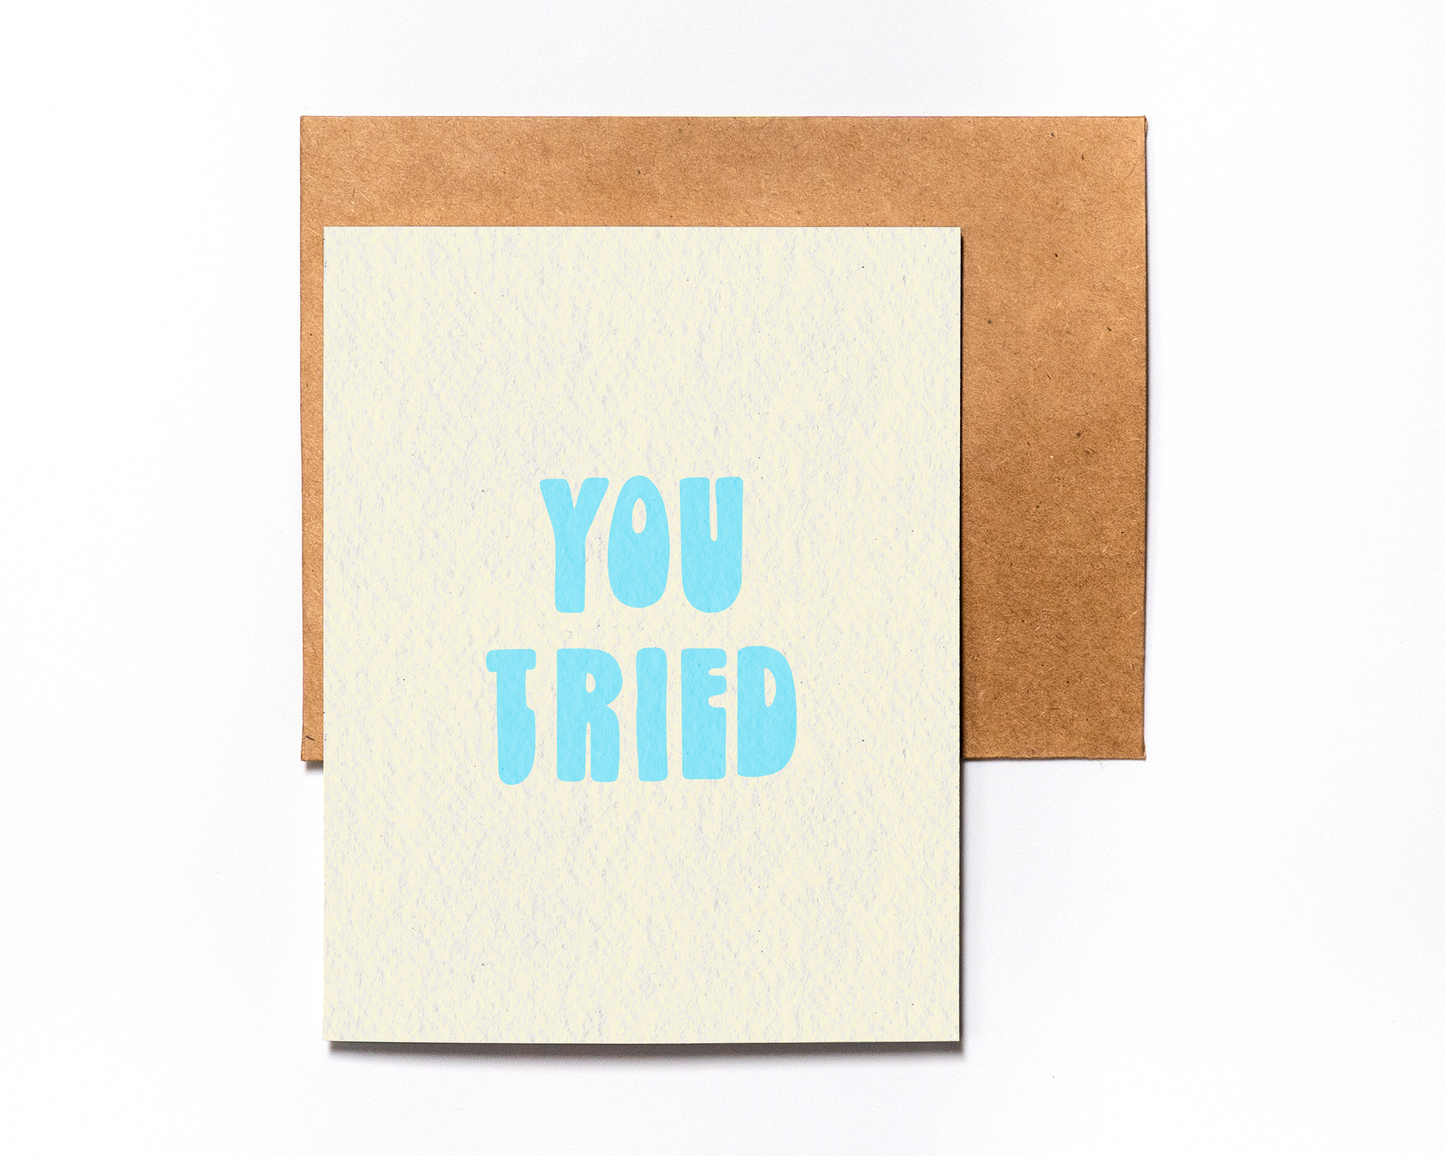 You Tried - Encouragement Greeting Card - Congrats - Proud of You - Celebrate - Minimalist Greeting Card - Blank Inside